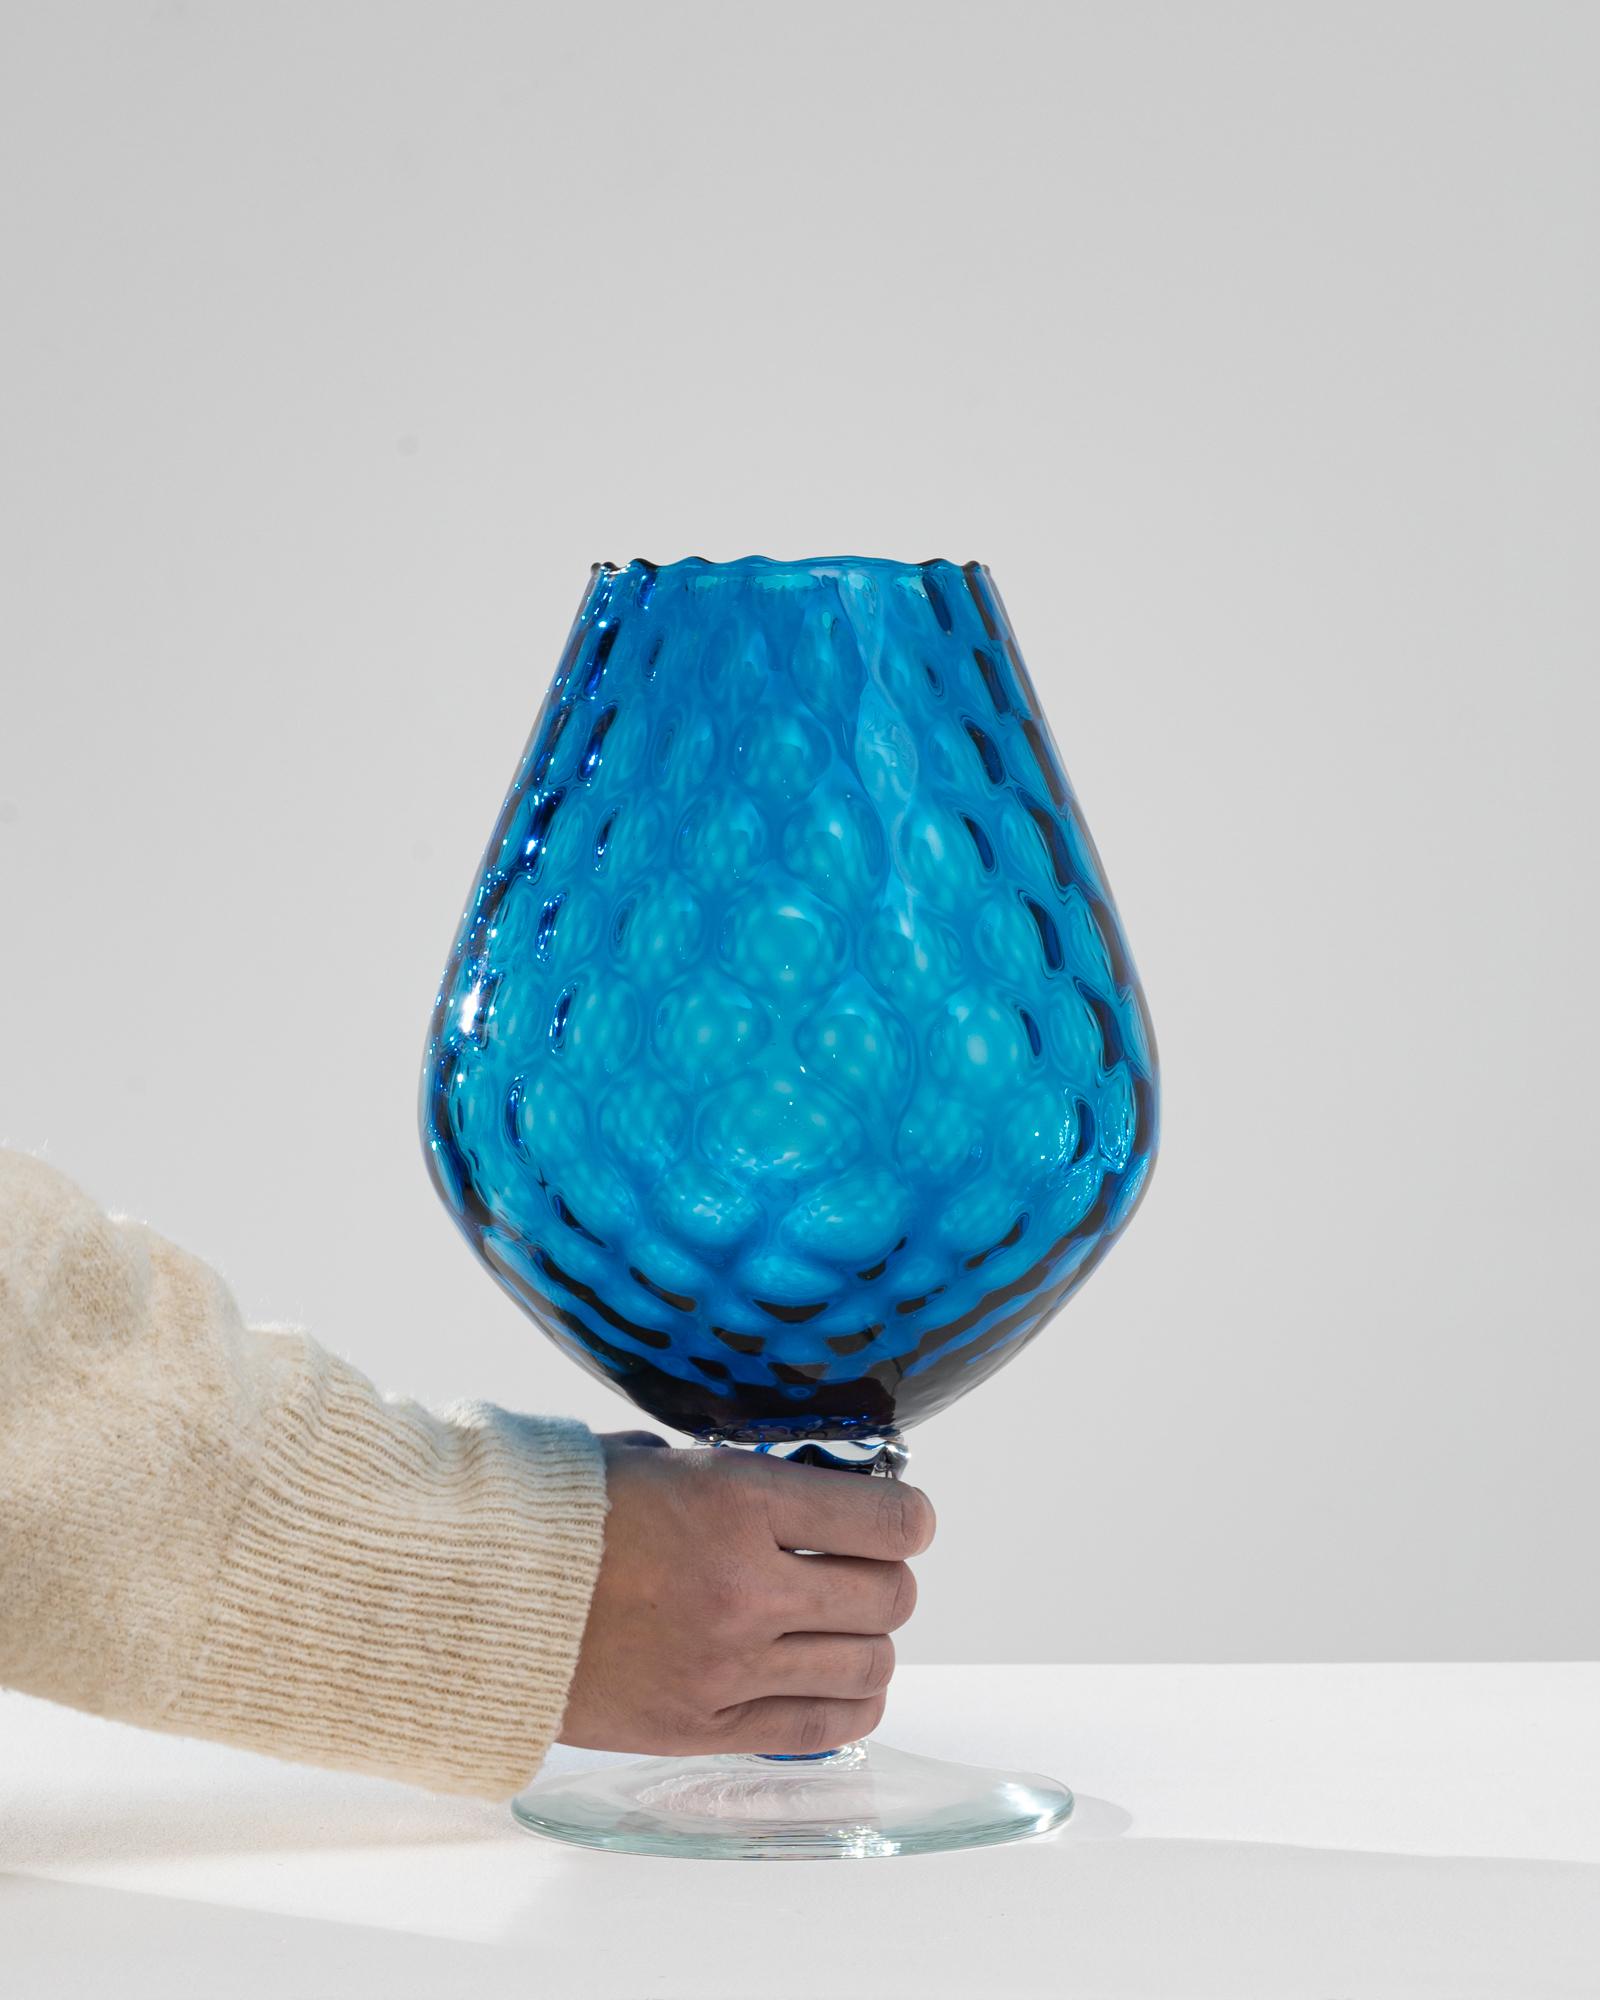 Introducing an exceptional piece from the 1960s, this Italian Blue Glass Goblet is a marvel of vintage design and glassblowing artistry. The vibrant azure blue, reminiscent of the Mediterranean Sea, is complemented by a unique textured surface that